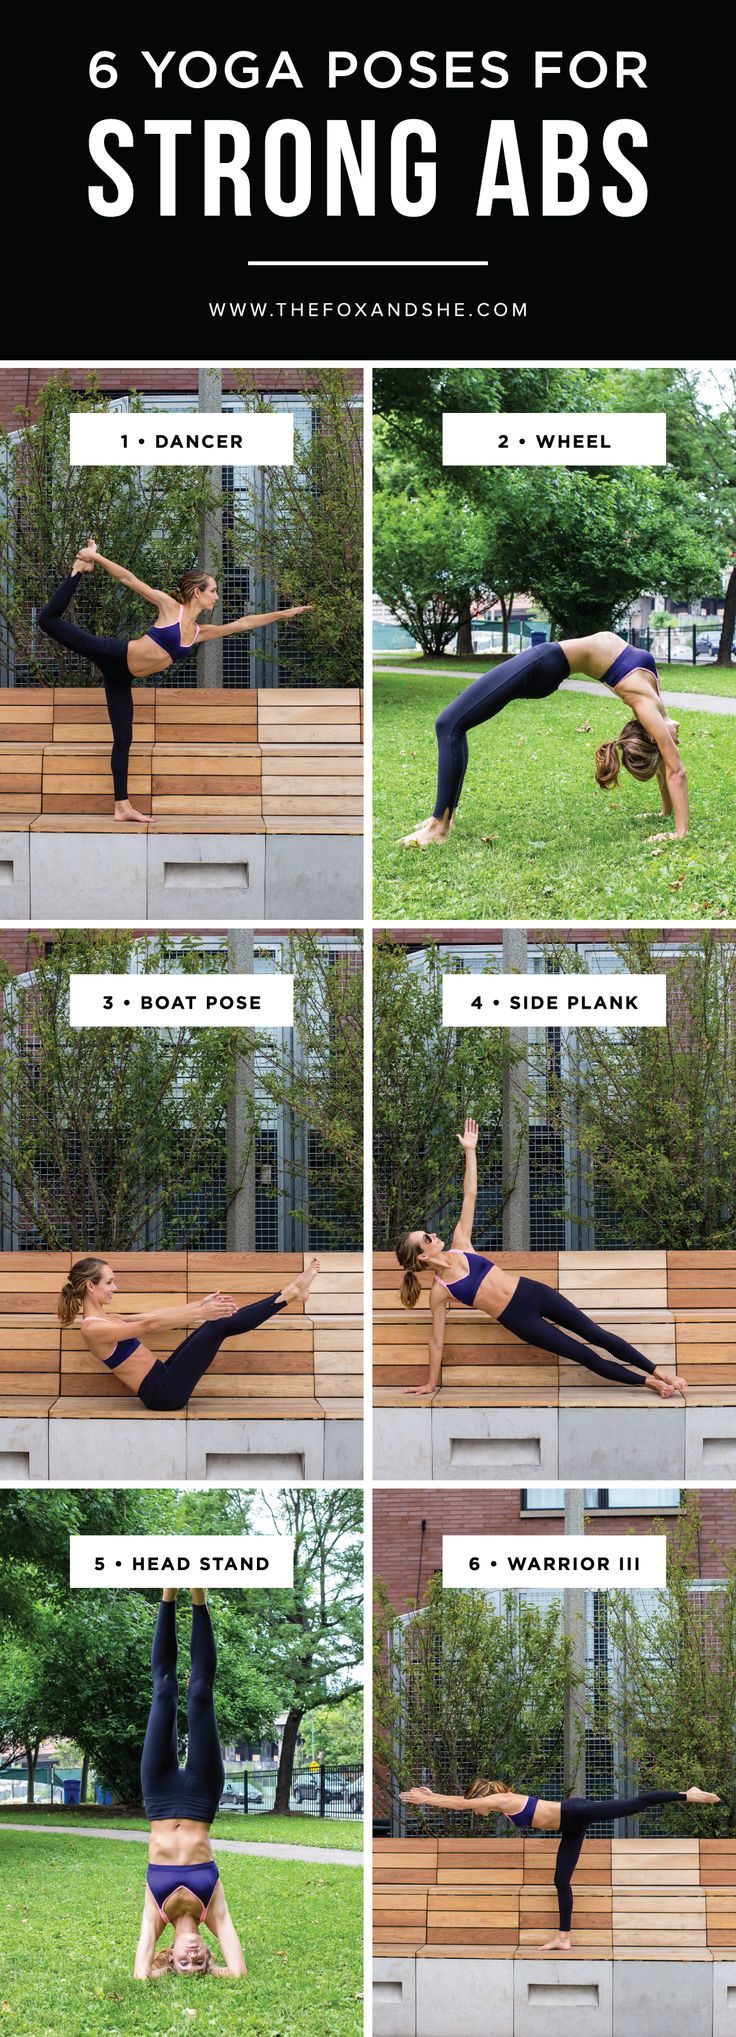 ☆ YOGA POSES ☆:   Summer is in full swing so we're sharing 6 yoga poses ...